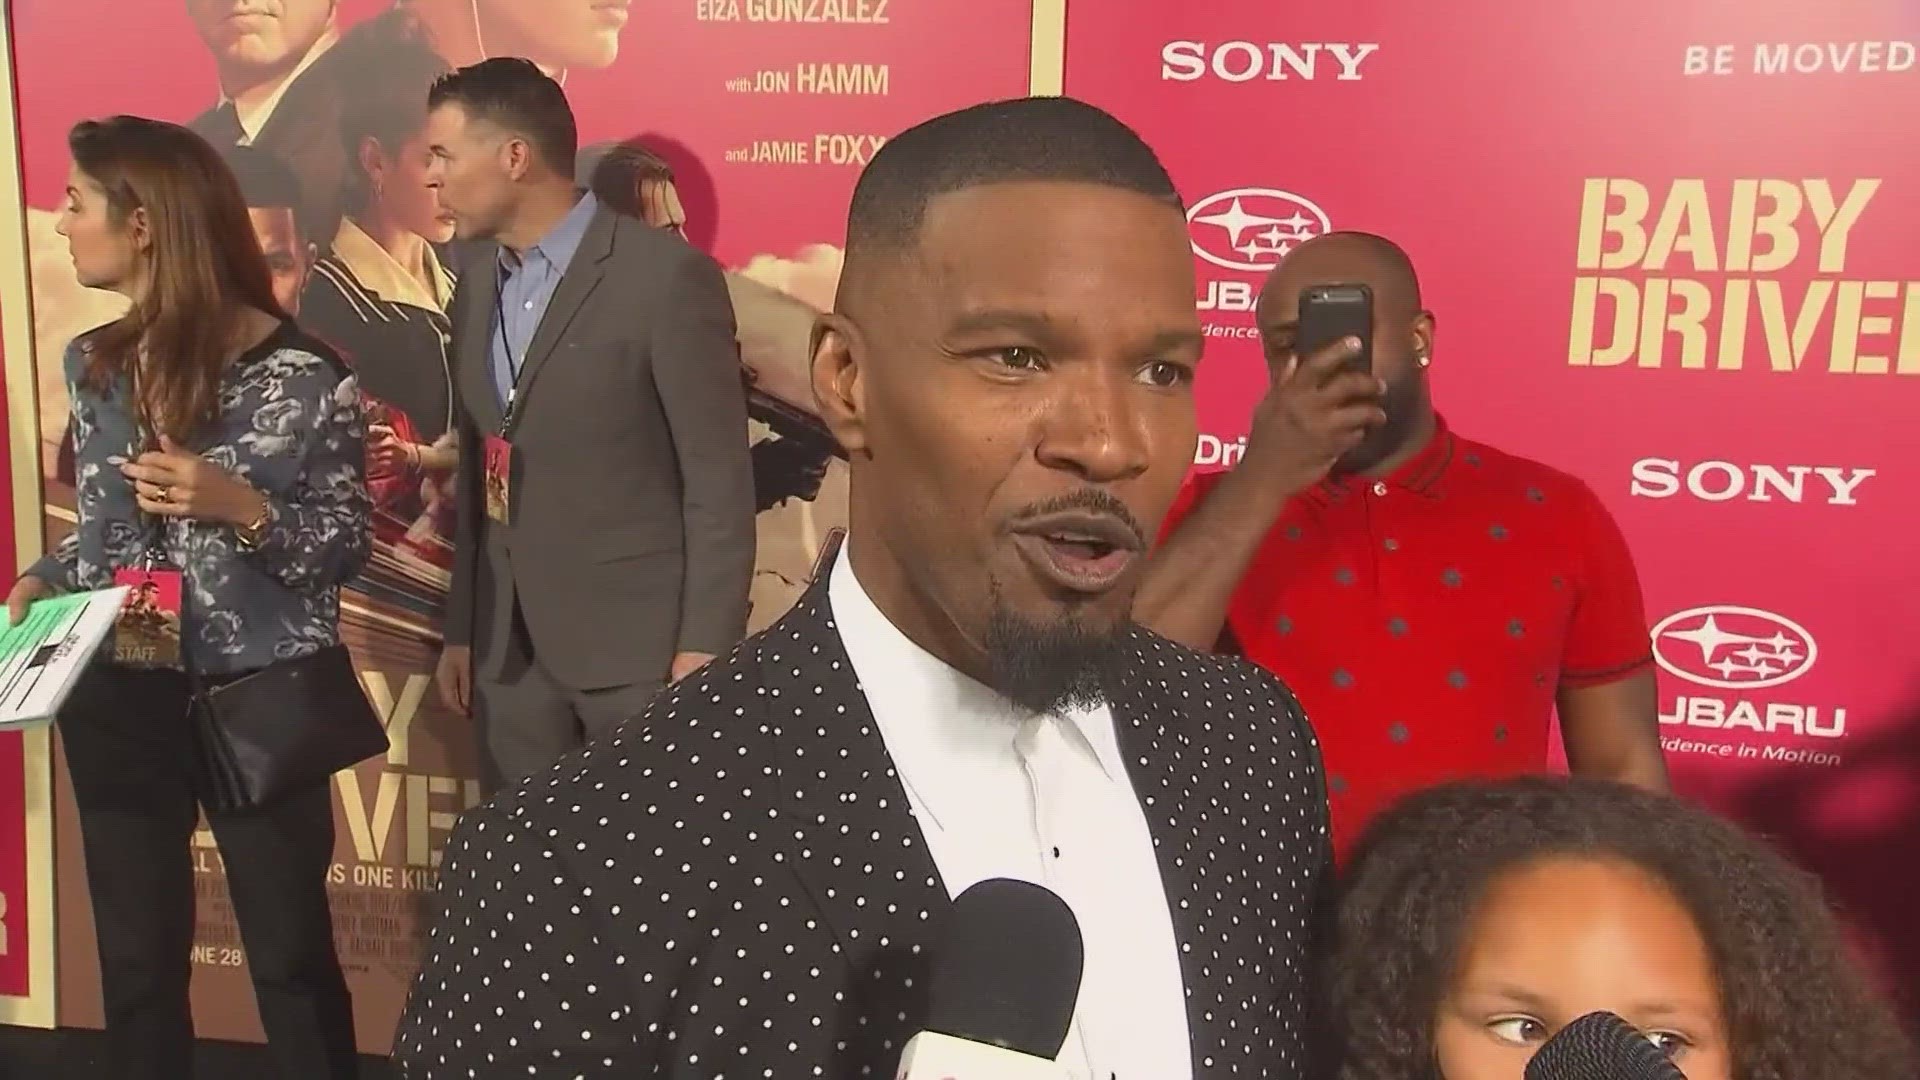 Little has been publicly released in the weeks since actor Jamie Foxx was hospitalized after experiencing what was described as a medical complication.